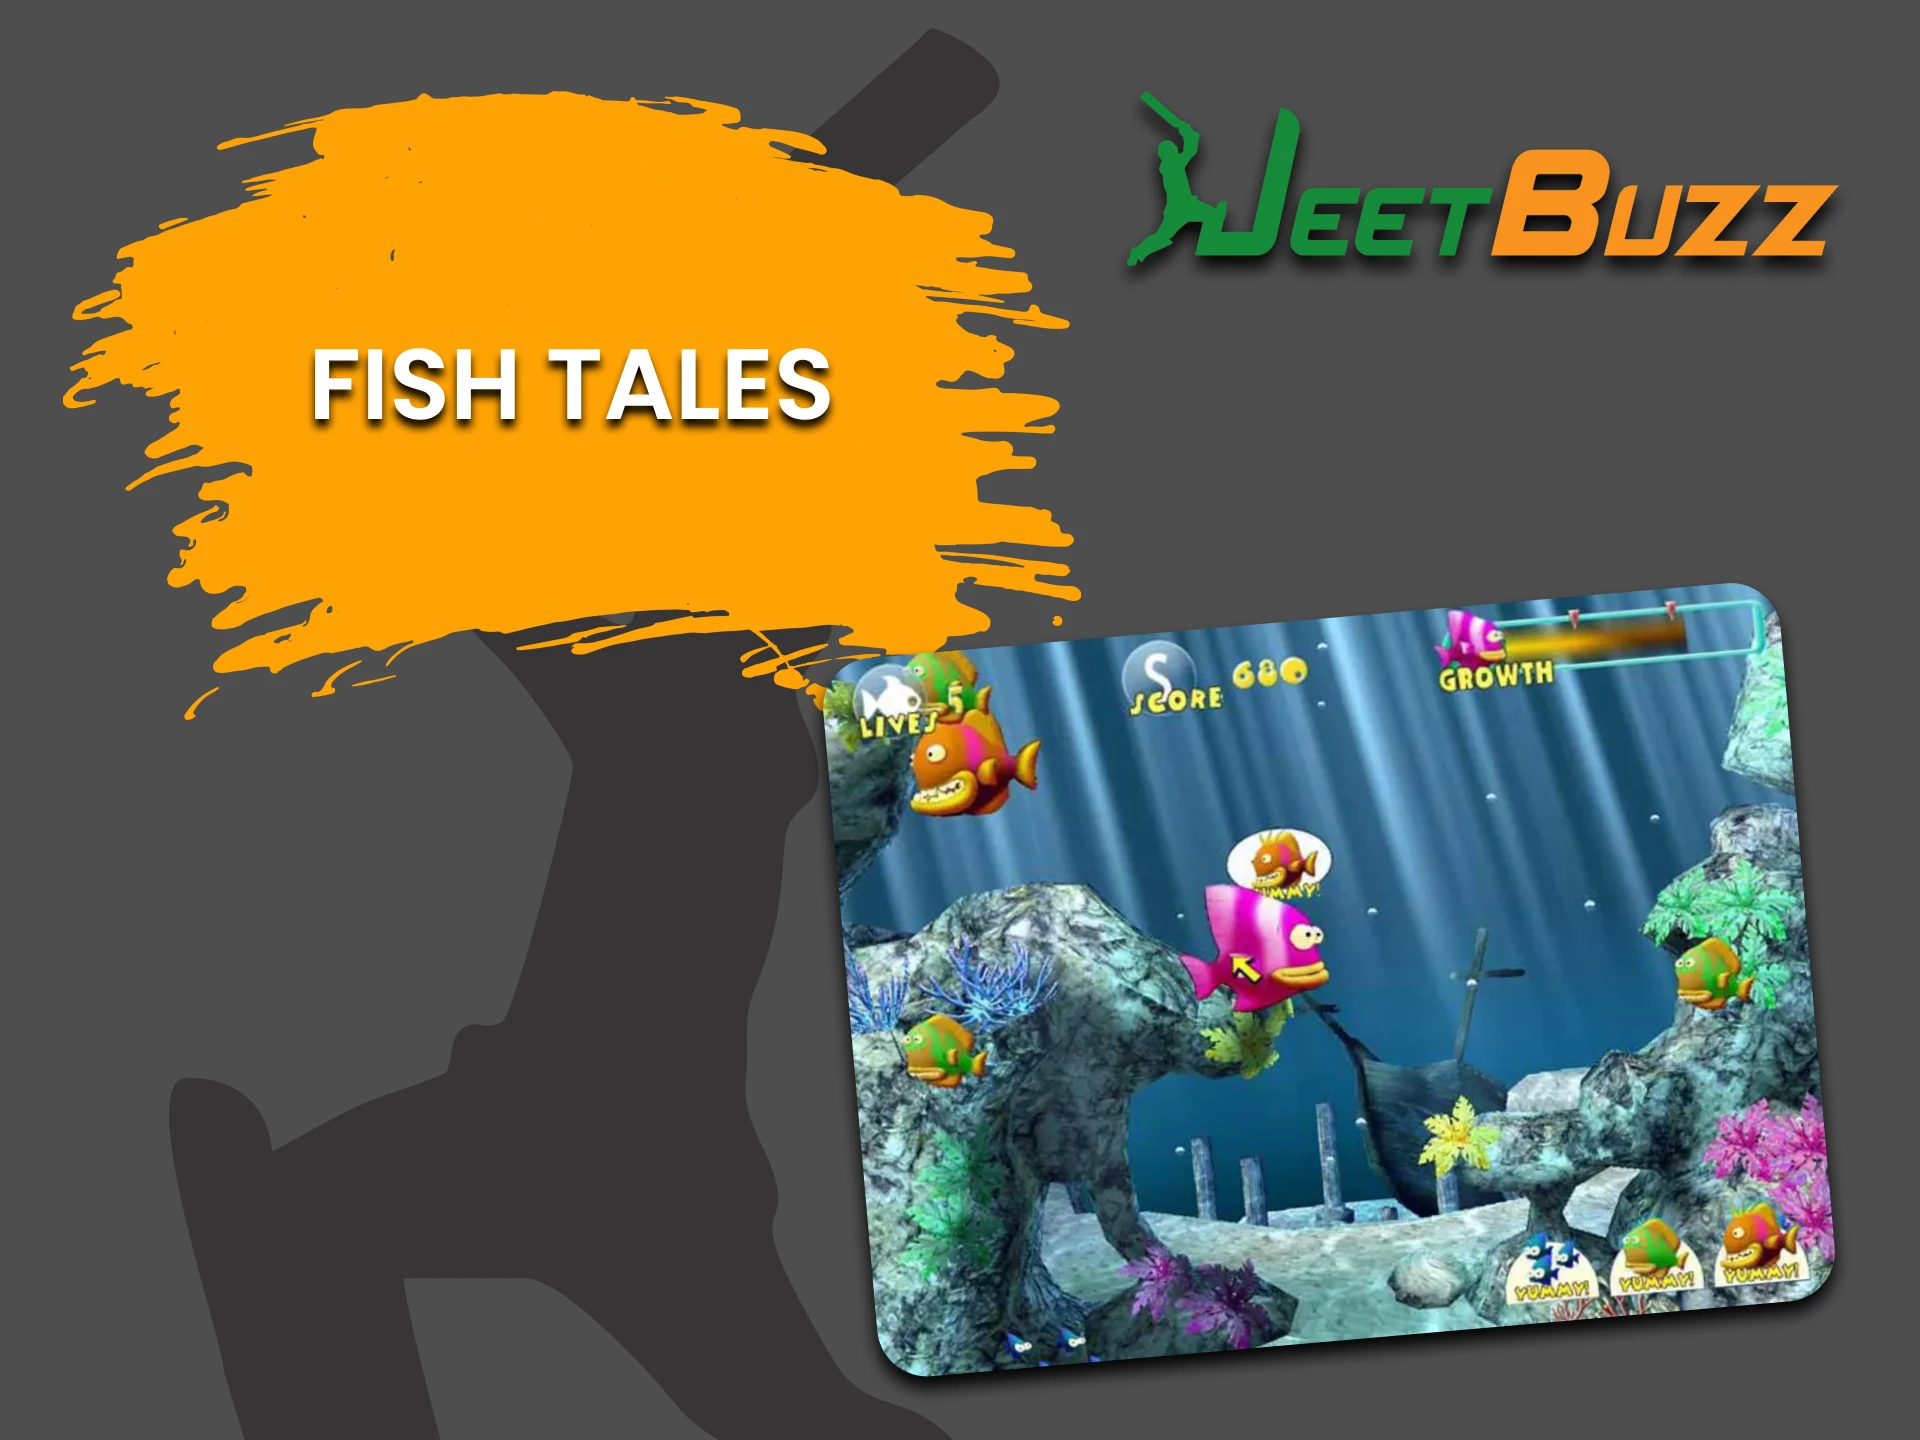 Try your hand at Fish Tales on JeetBuzz.